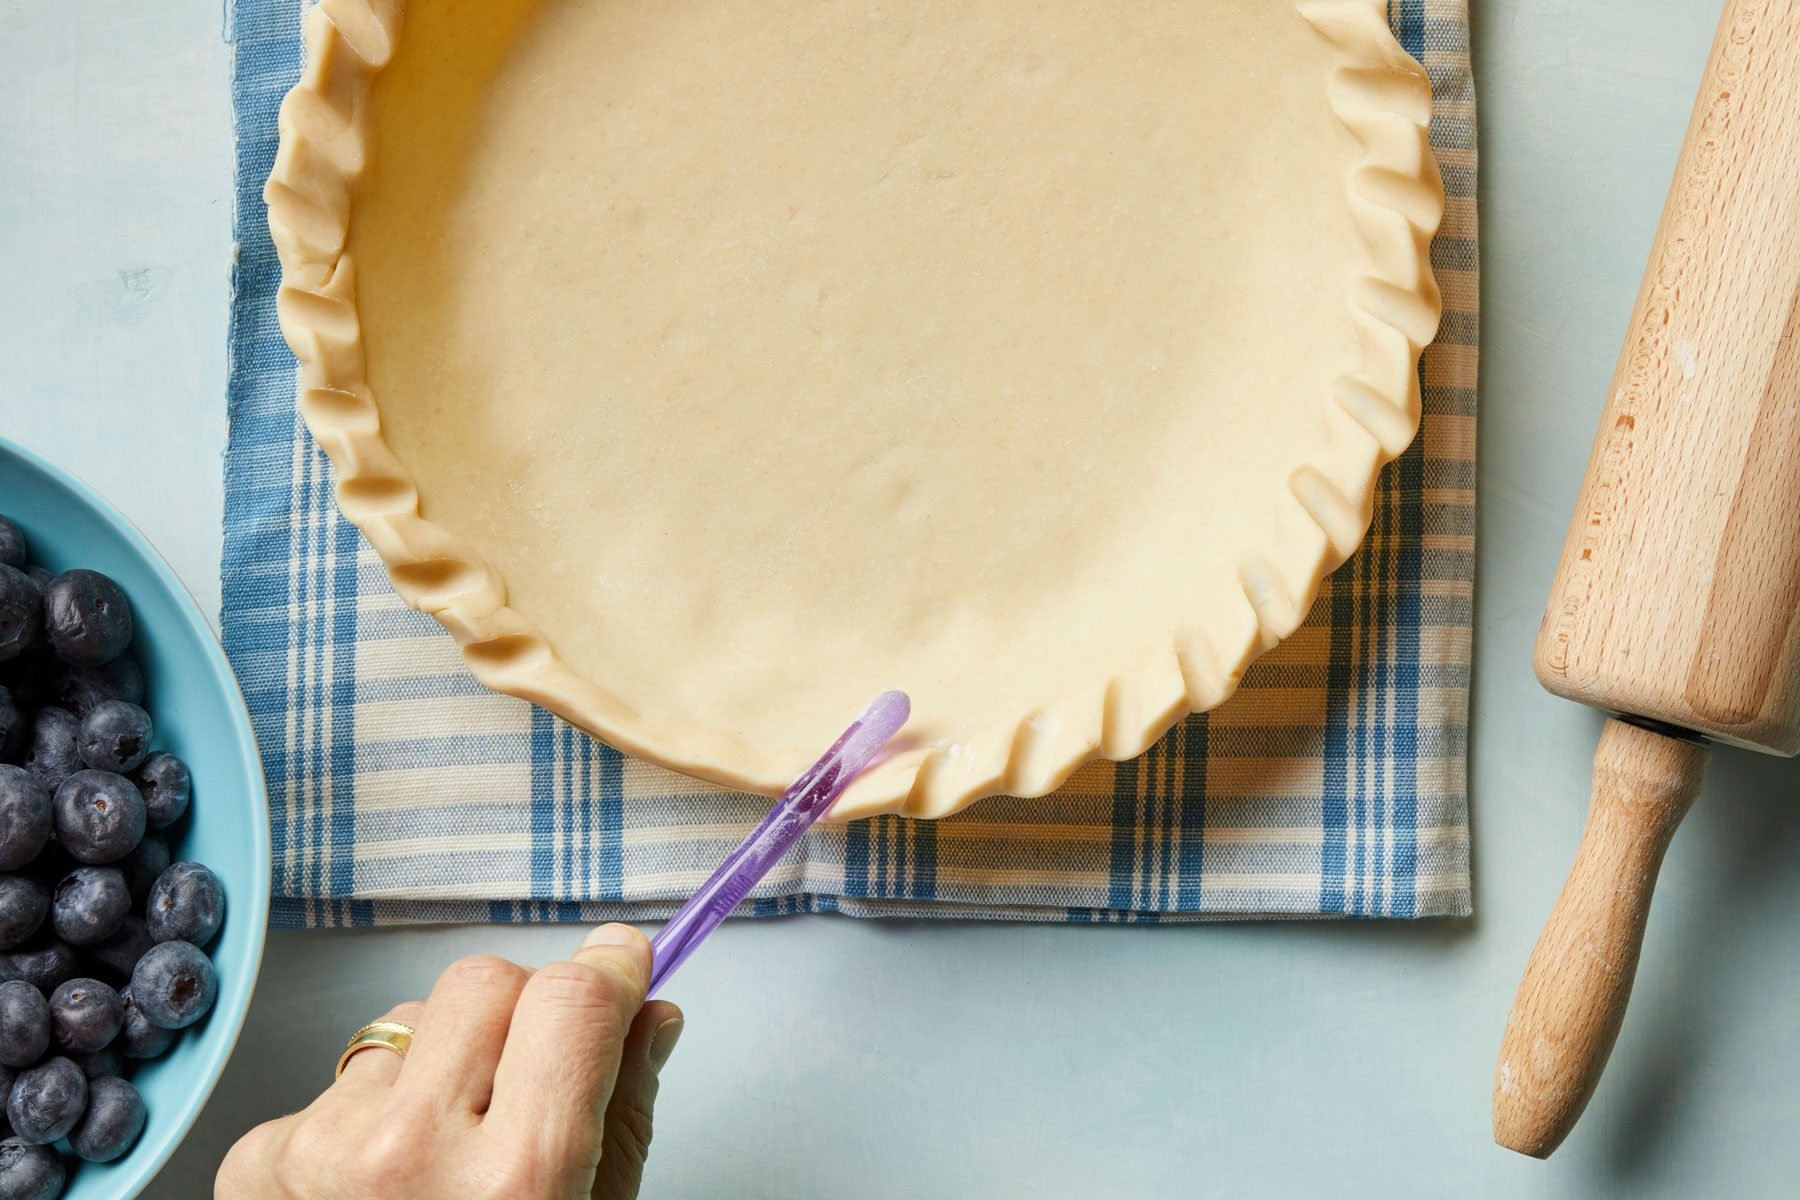 A hand holding a purple tweezers over a pie crust